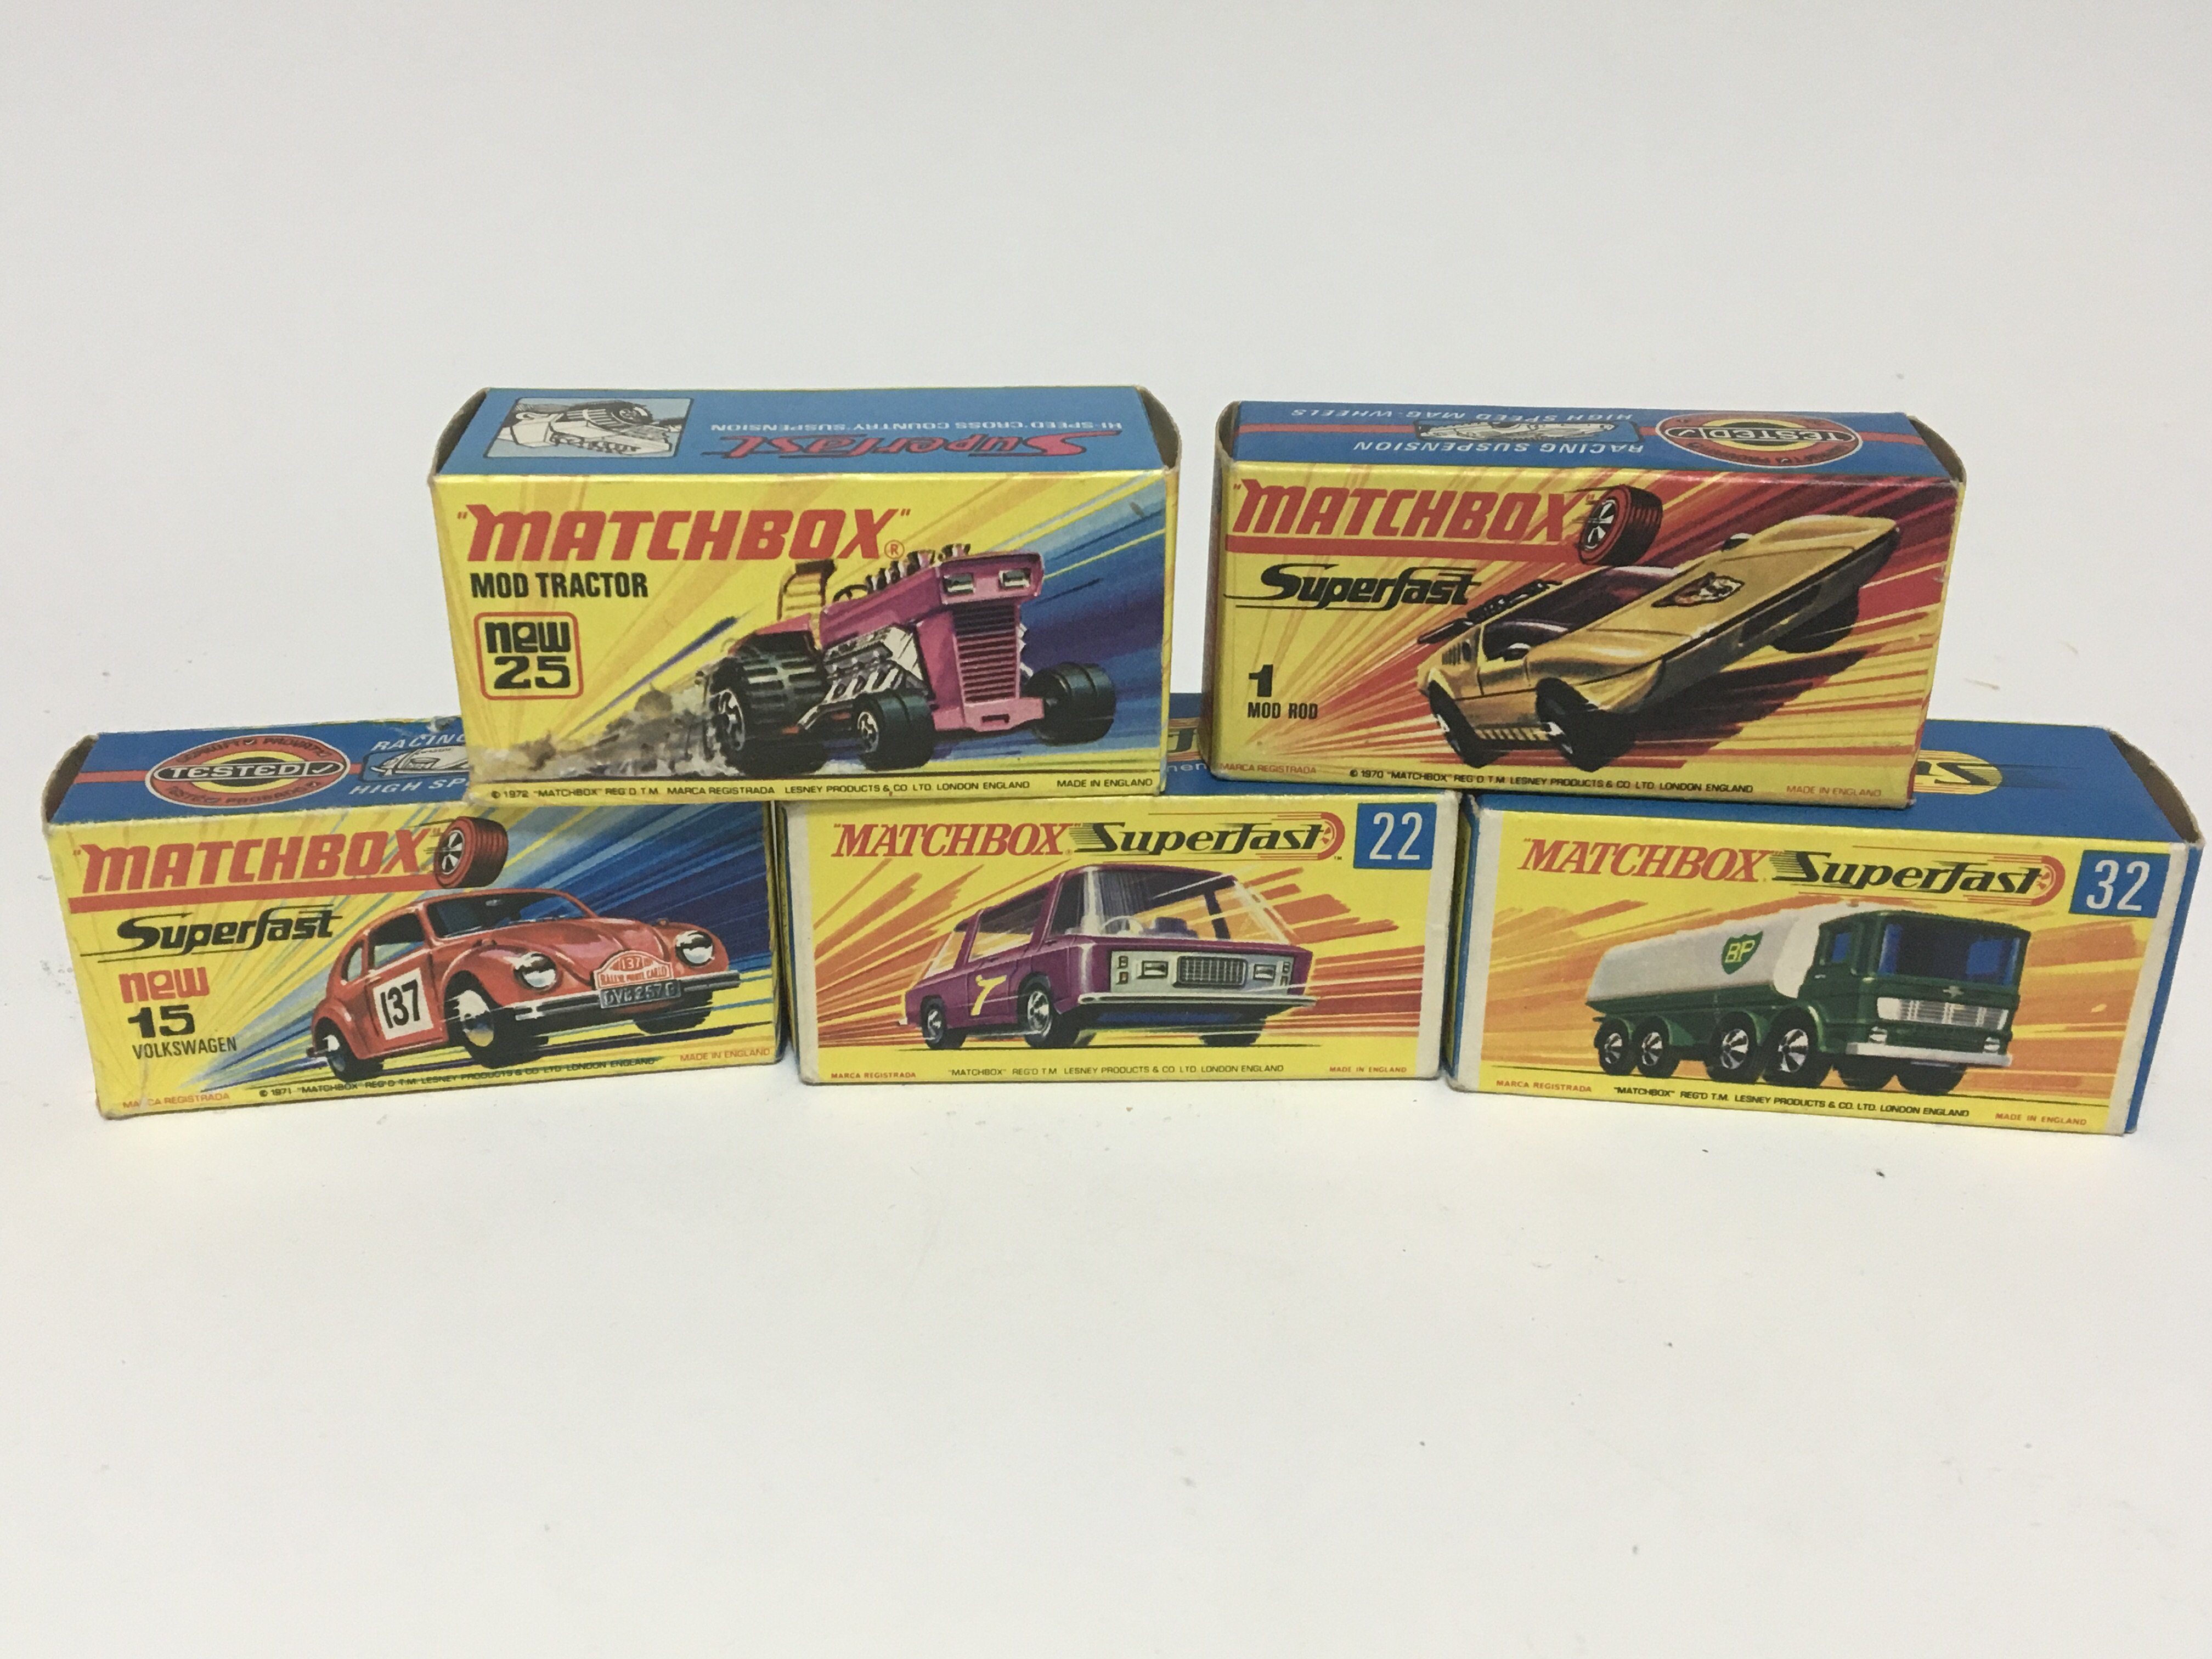 A collection of Matchbox Superfast cars in boxes.